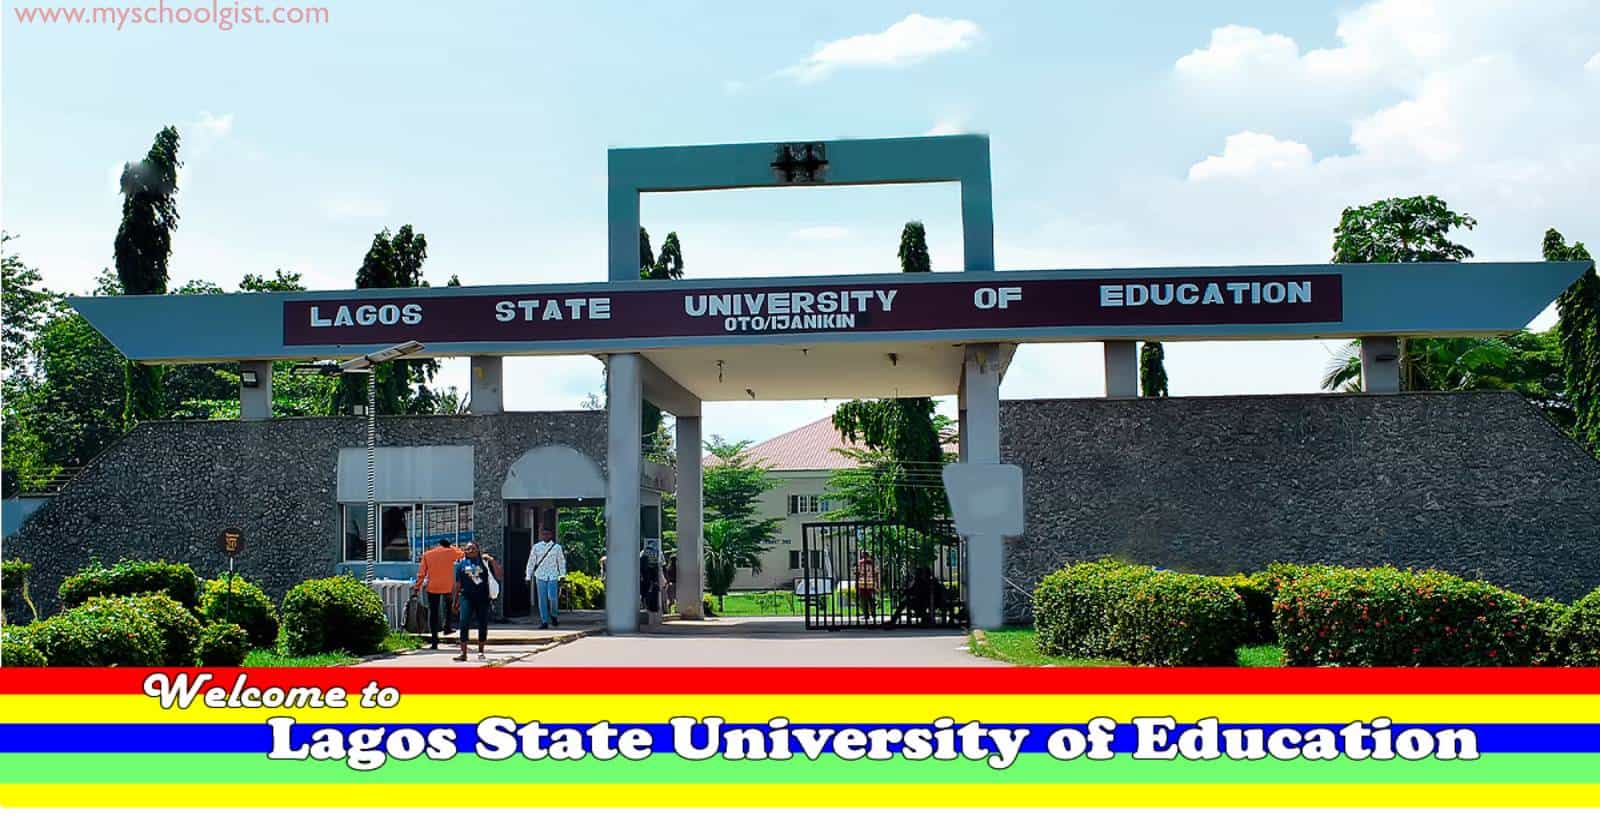 Admissions List for Lagos State University of Education (LASUED)